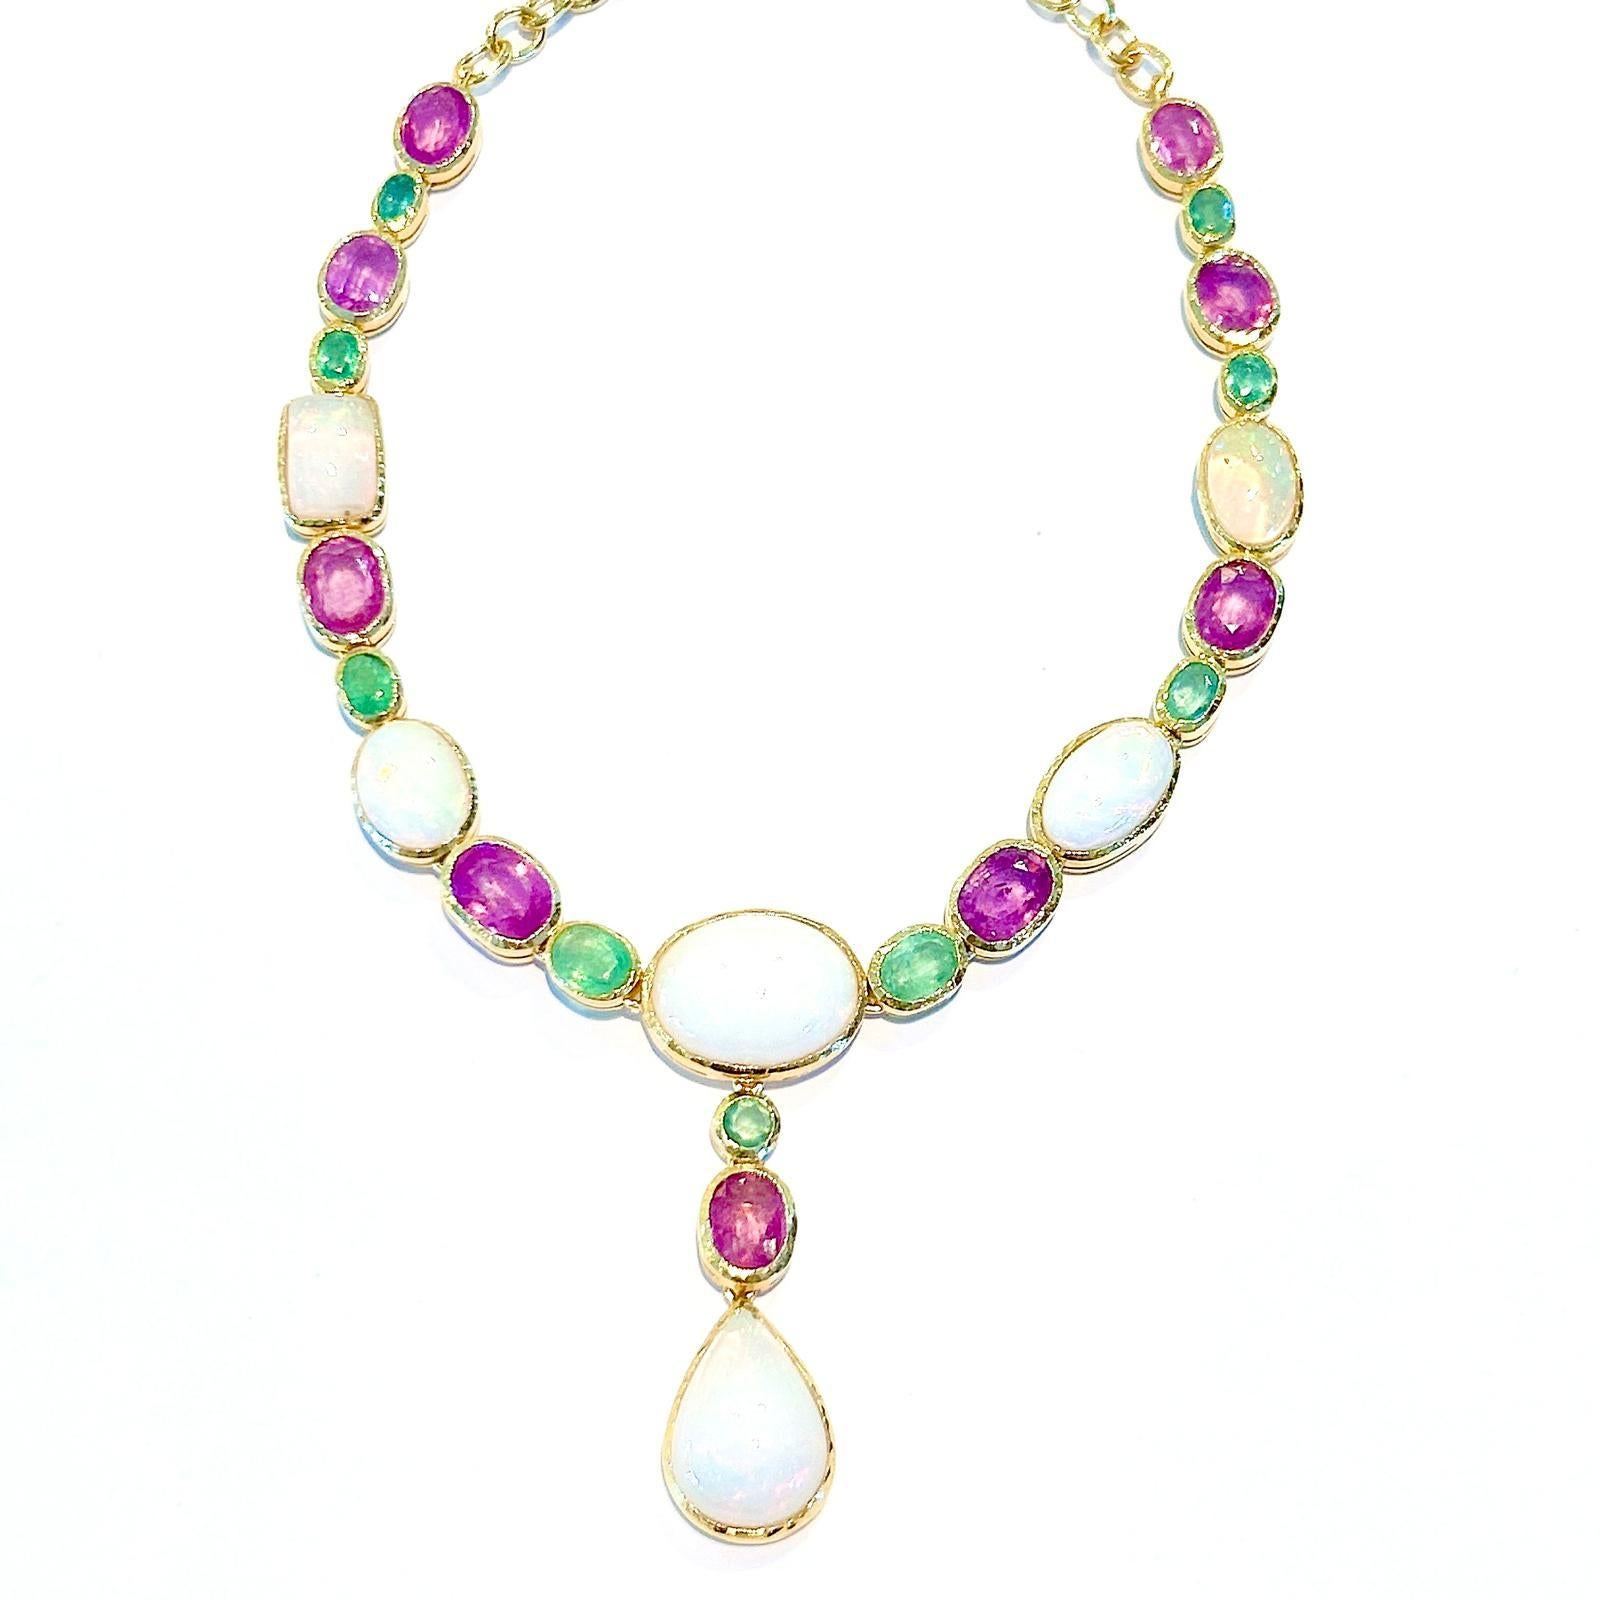 Bochic “Capri” Pink sapphire, Emerald, Opal Necklace Set In 22K Gold & Silver 
Natural pink sapphire - 28 Carats 
Ethiopian White Opal -  30 Carats 
Natural Green Emerald from Zambia - 7 Carats 
Set in 22K Gold and Silver 
Drop Necklace, Multi